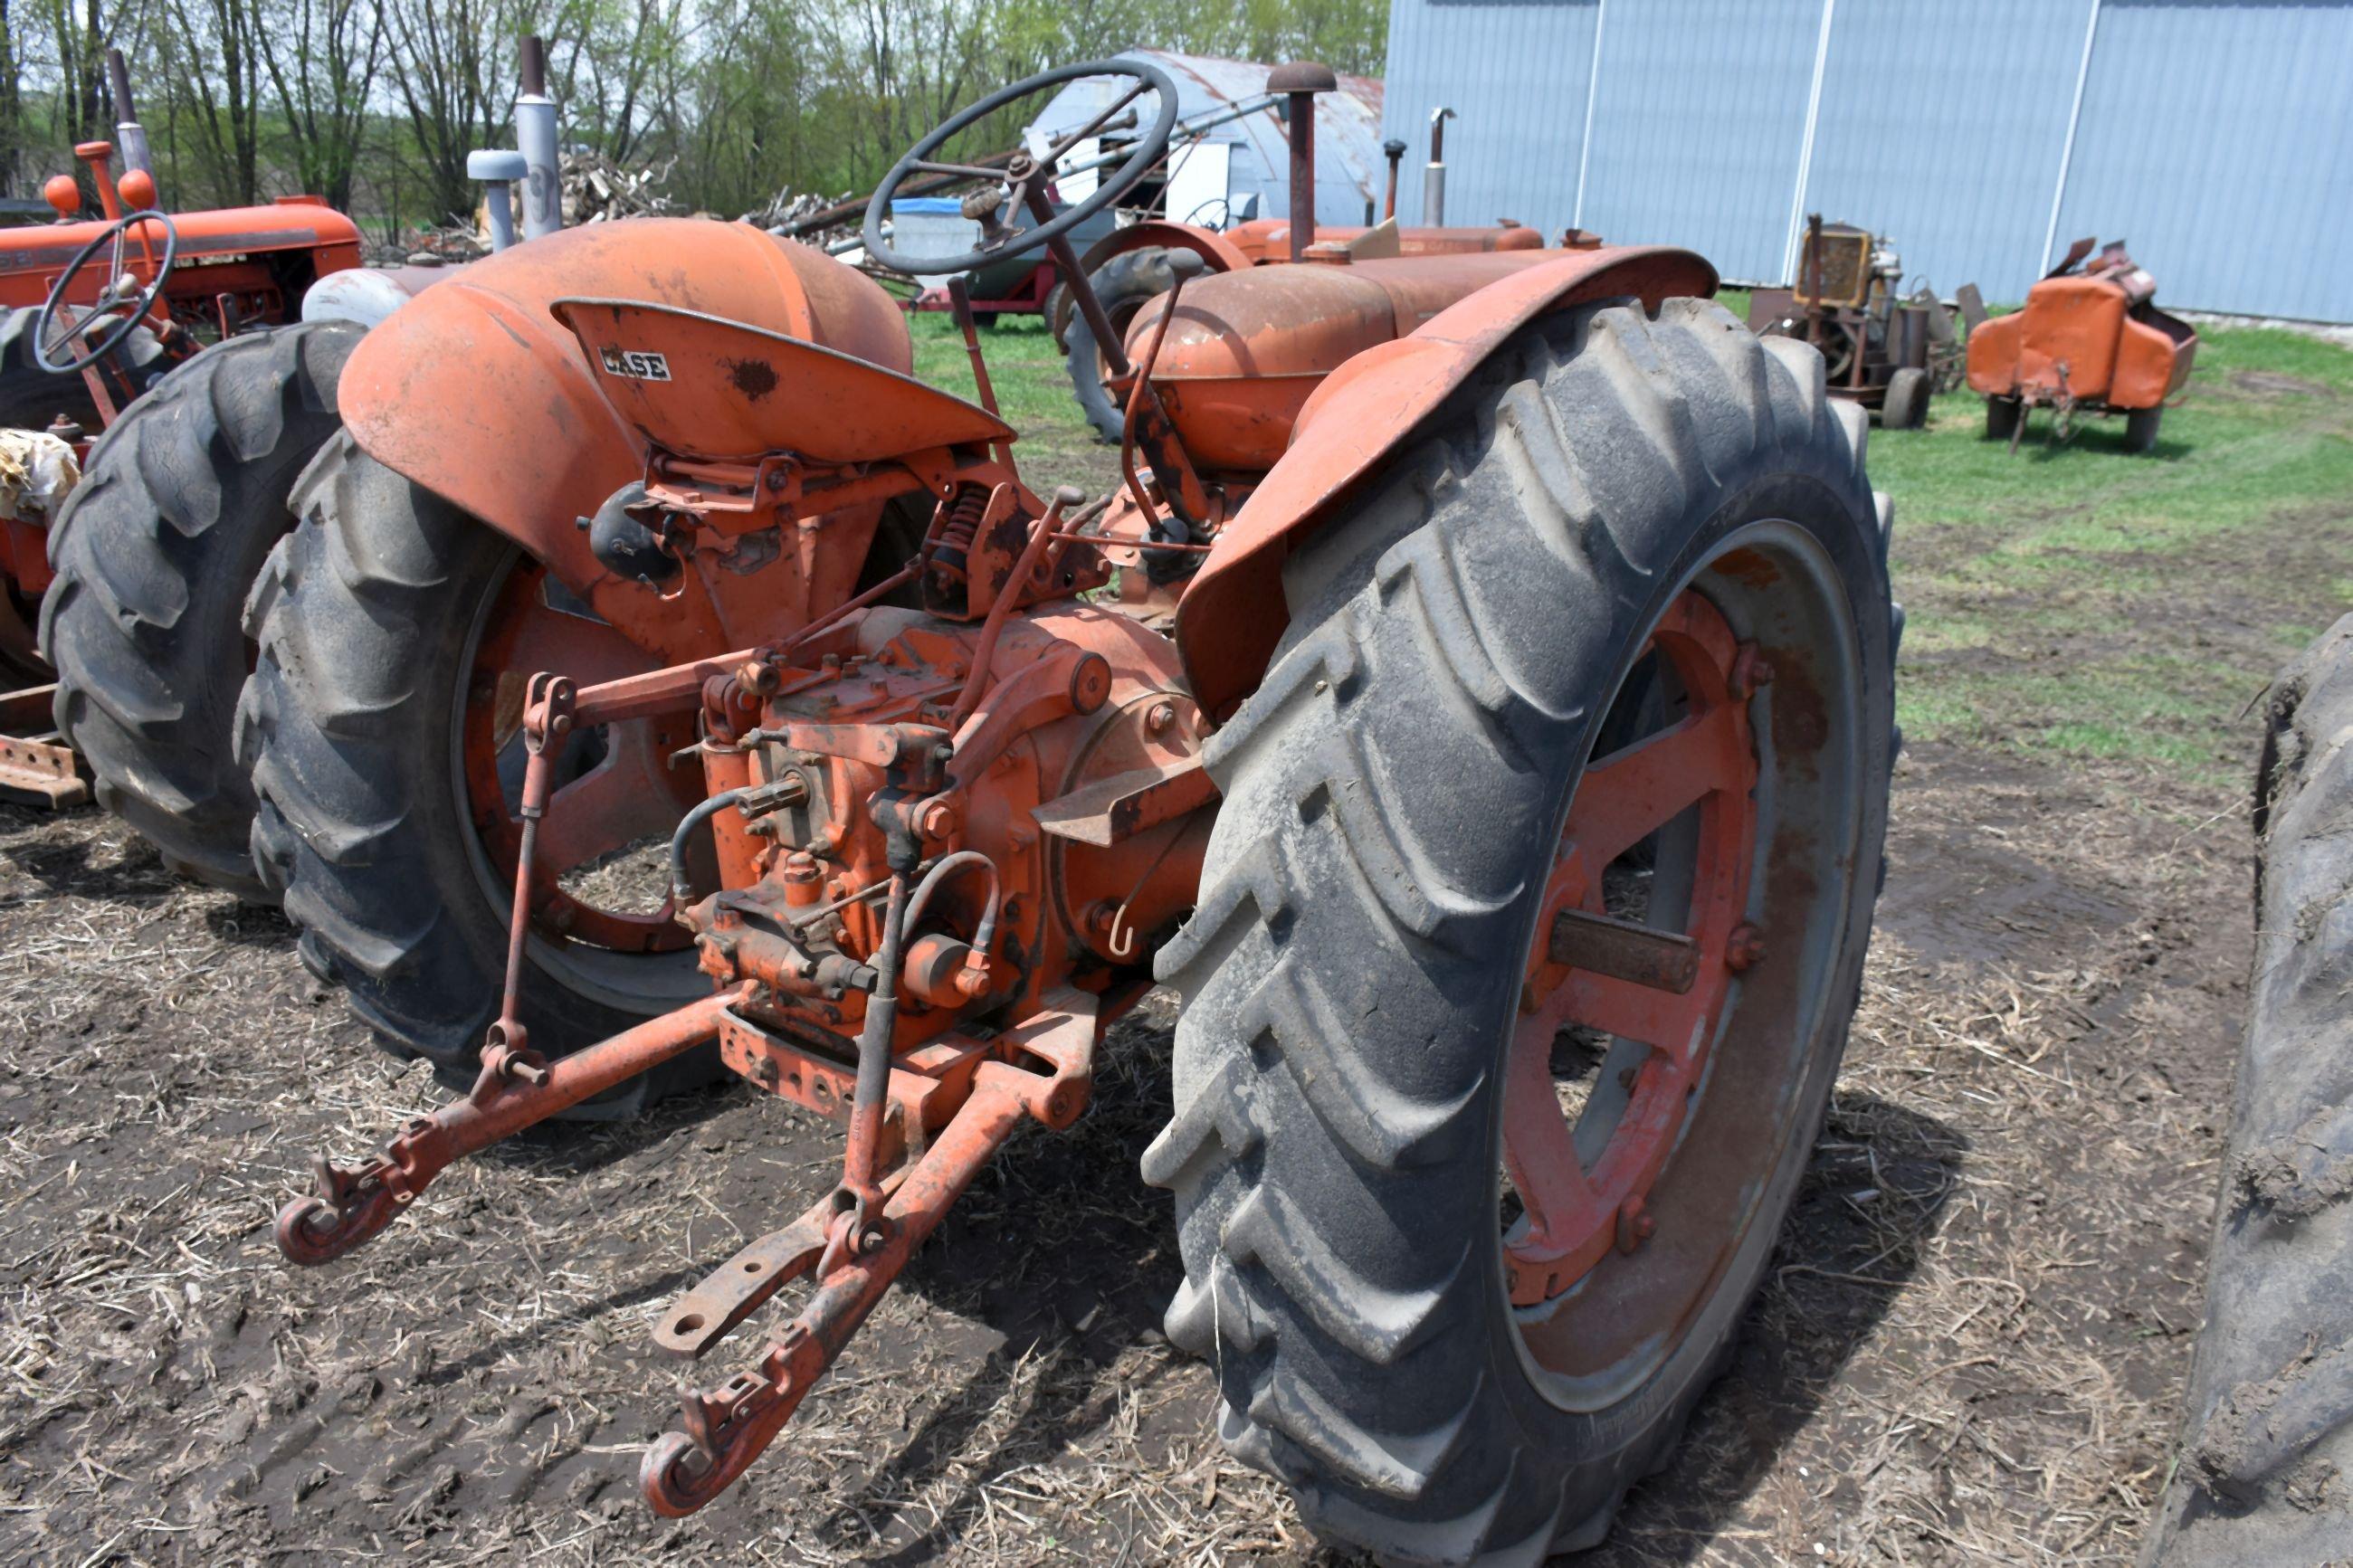 1951 Case Model SC Tractor, Narrow Front, Fenders, Eagle Hitch, Running Condition, Engine Block Is C